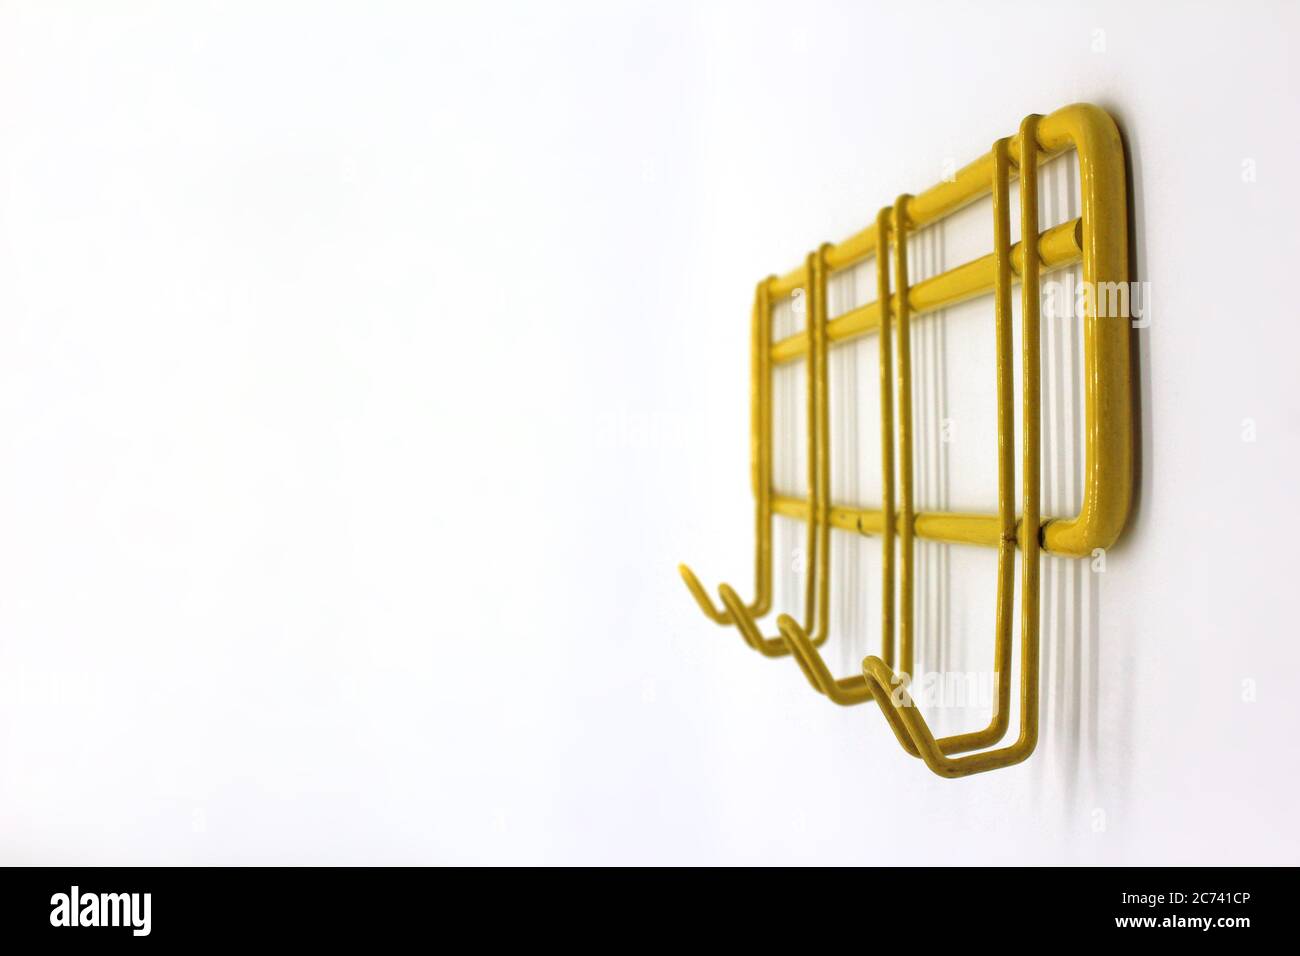 Yellow wall hanger isolated on a white background, close-up Stock Photo